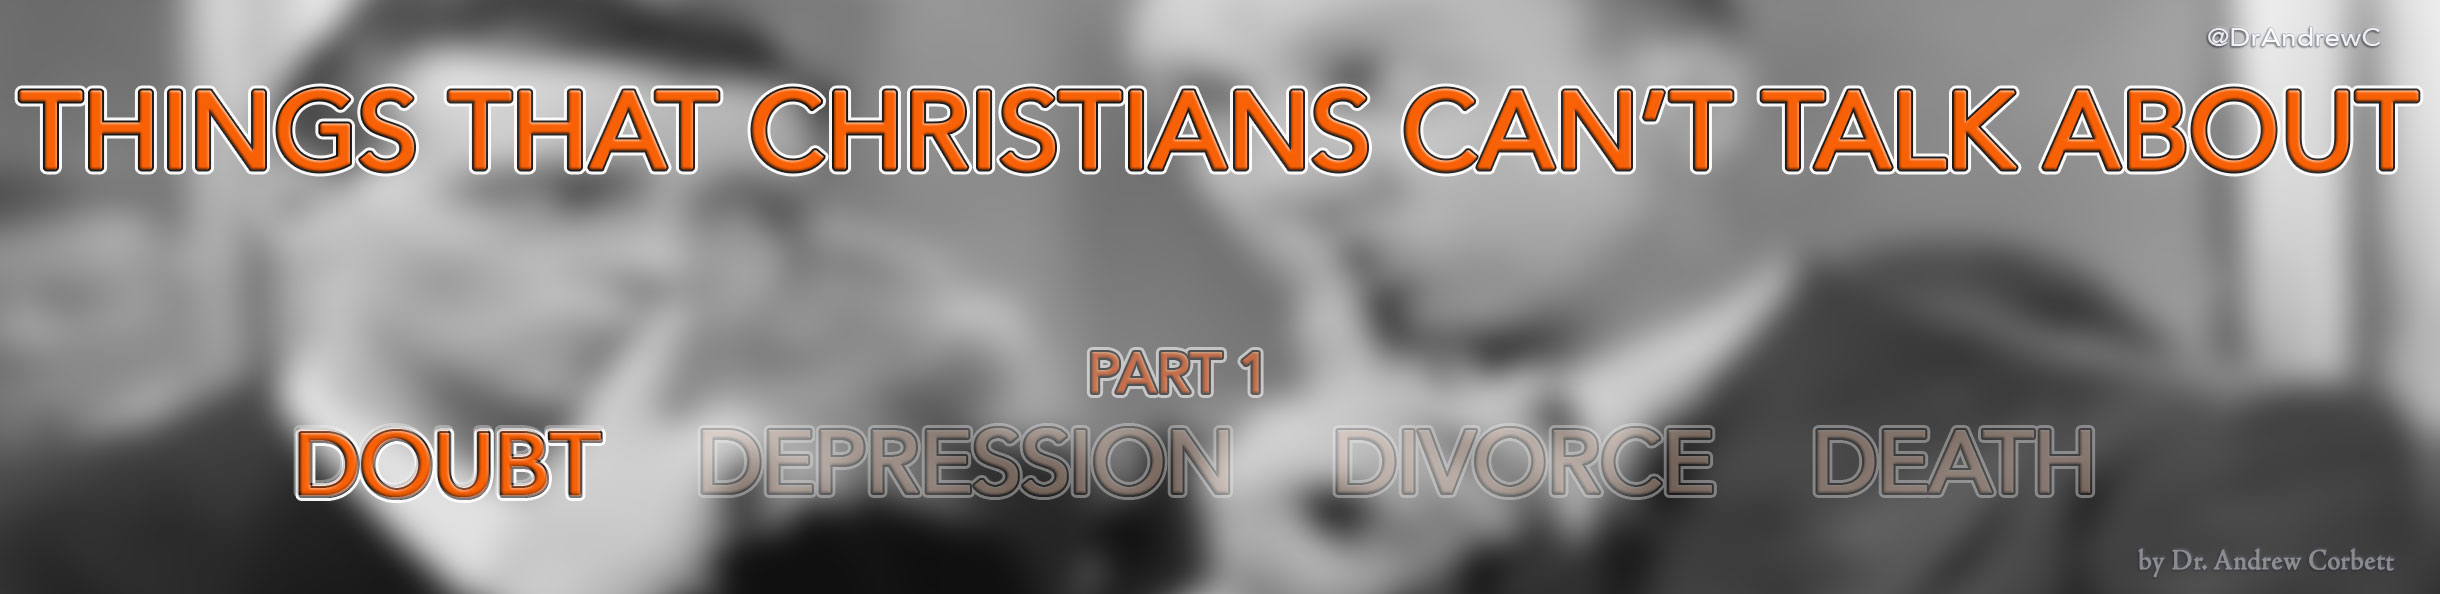 THINGS THAT CHRISTIANS CAN'T TALK ABOUT - Pt 1 - Doubt